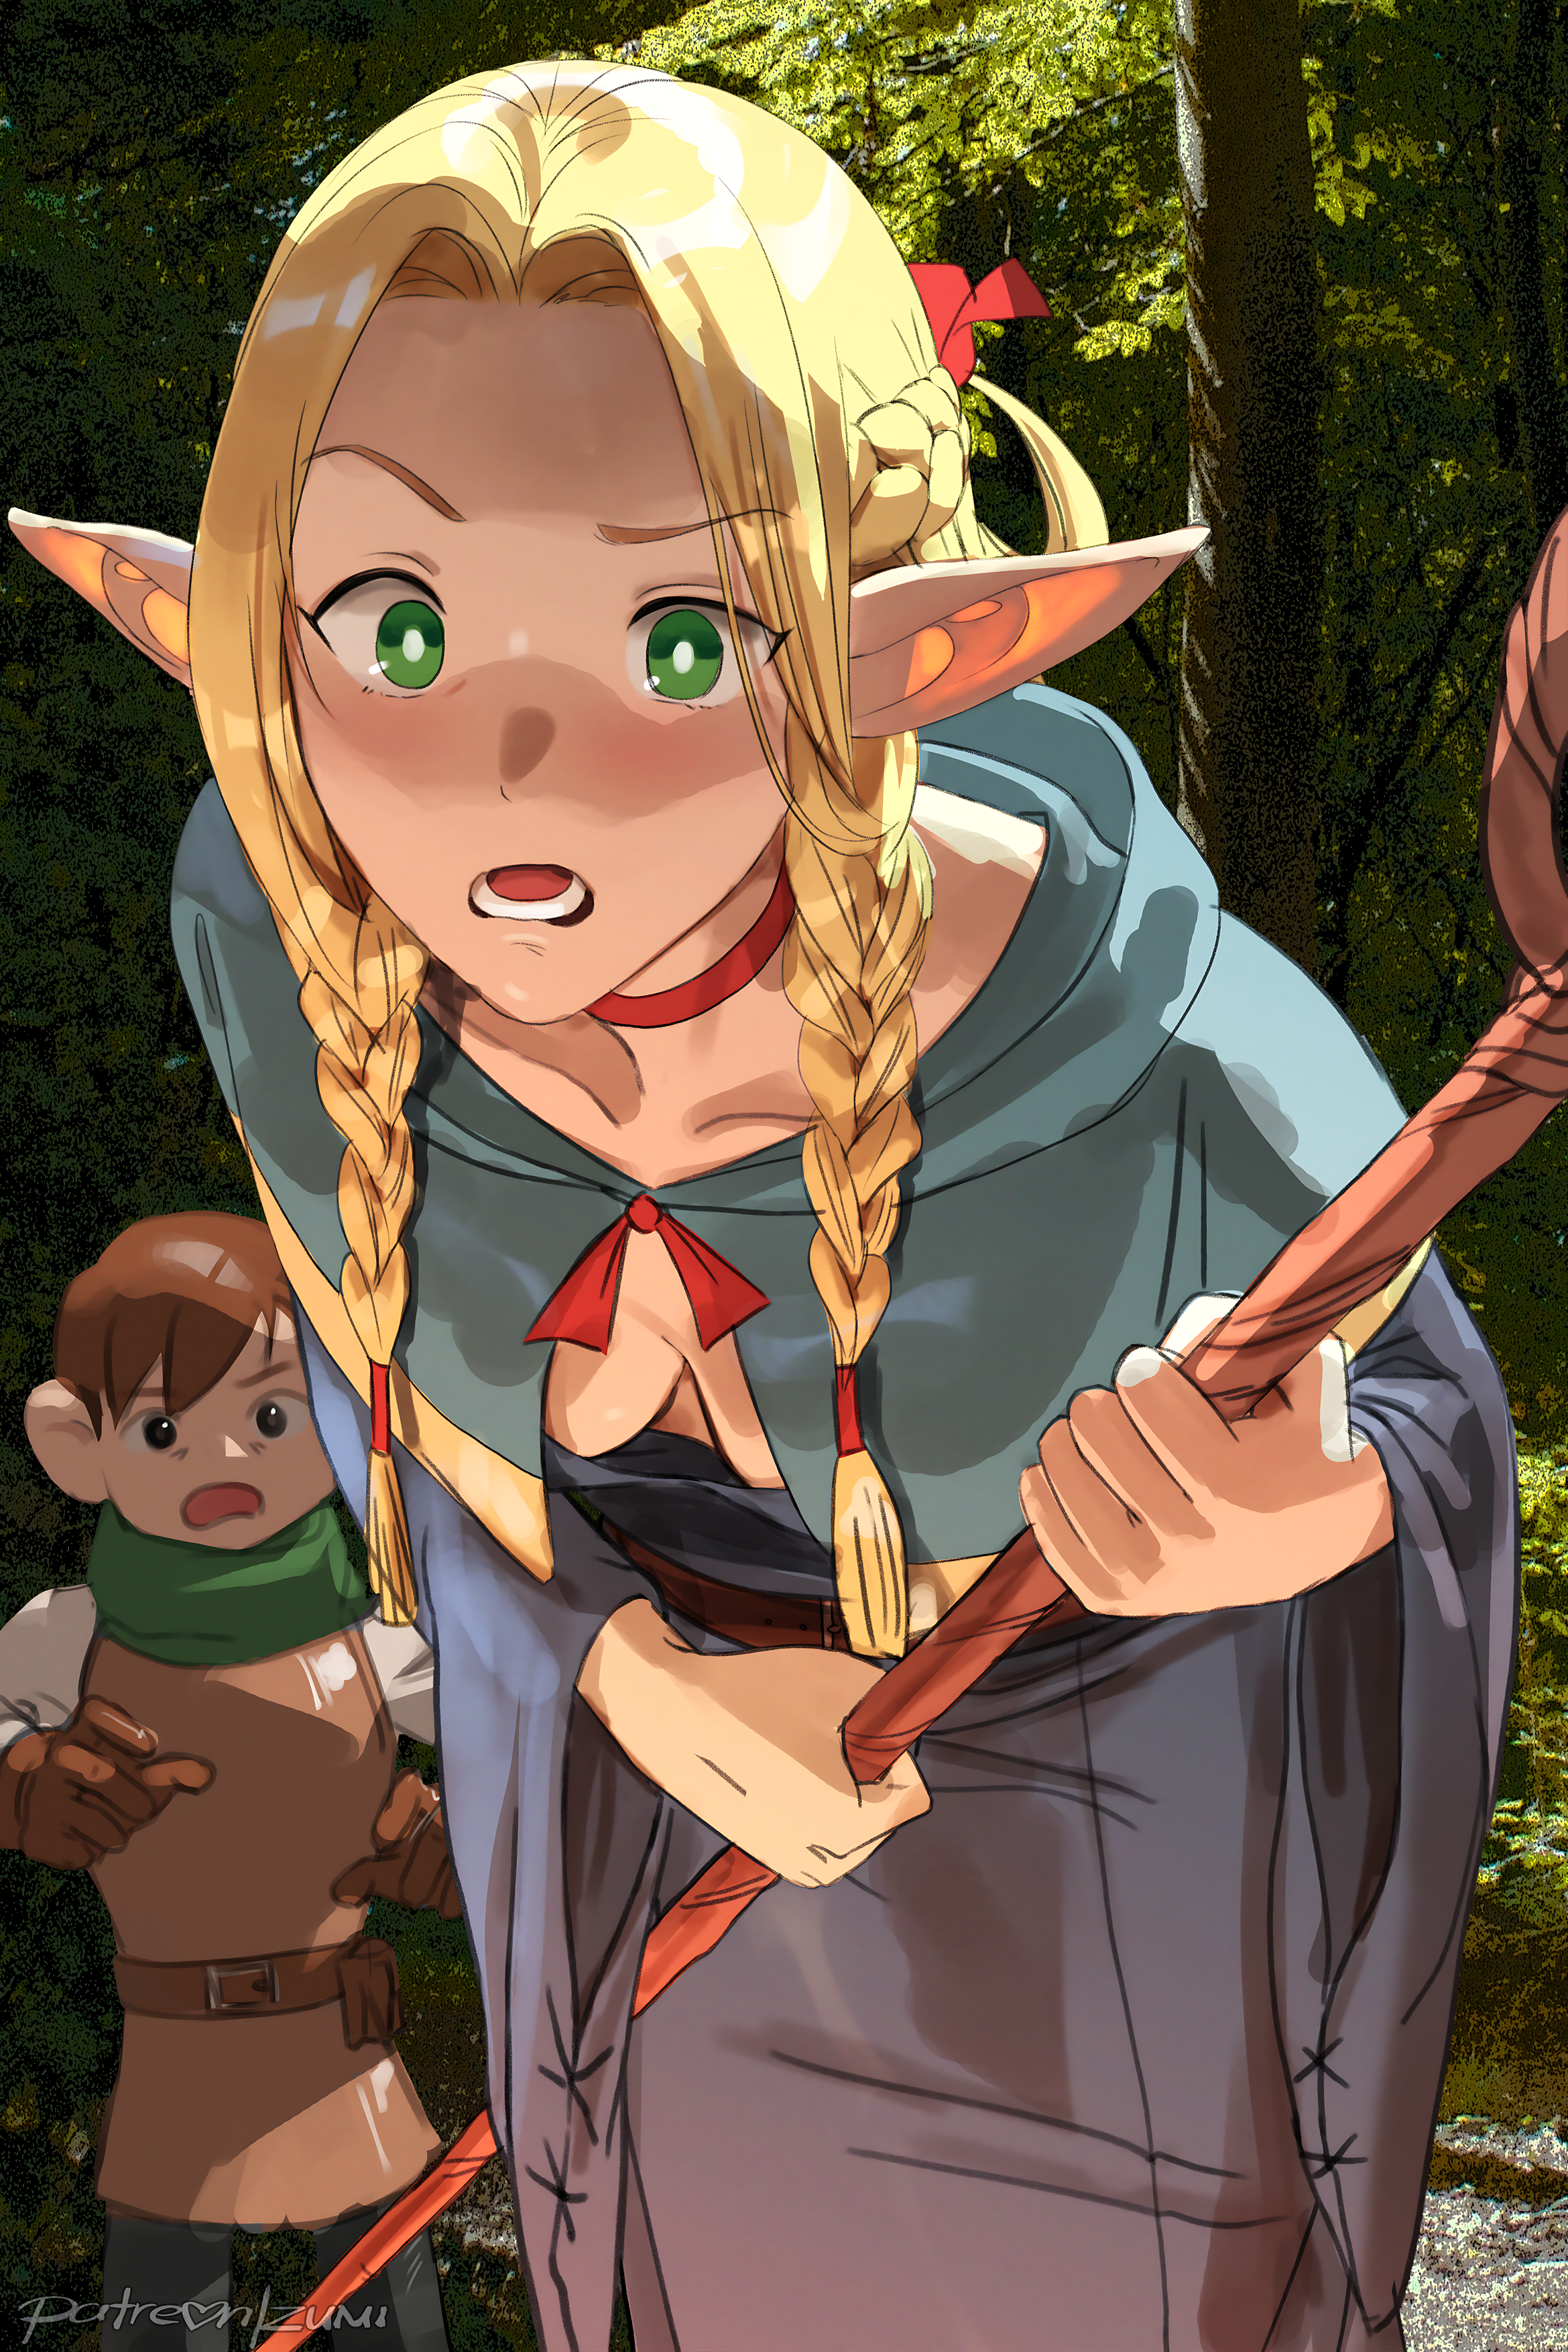 Anime 2339x3508 Marcille Donato Delicious in Dungeon anime anime girls blonde elves pointy ears braids artwork drawing fan art Zumi